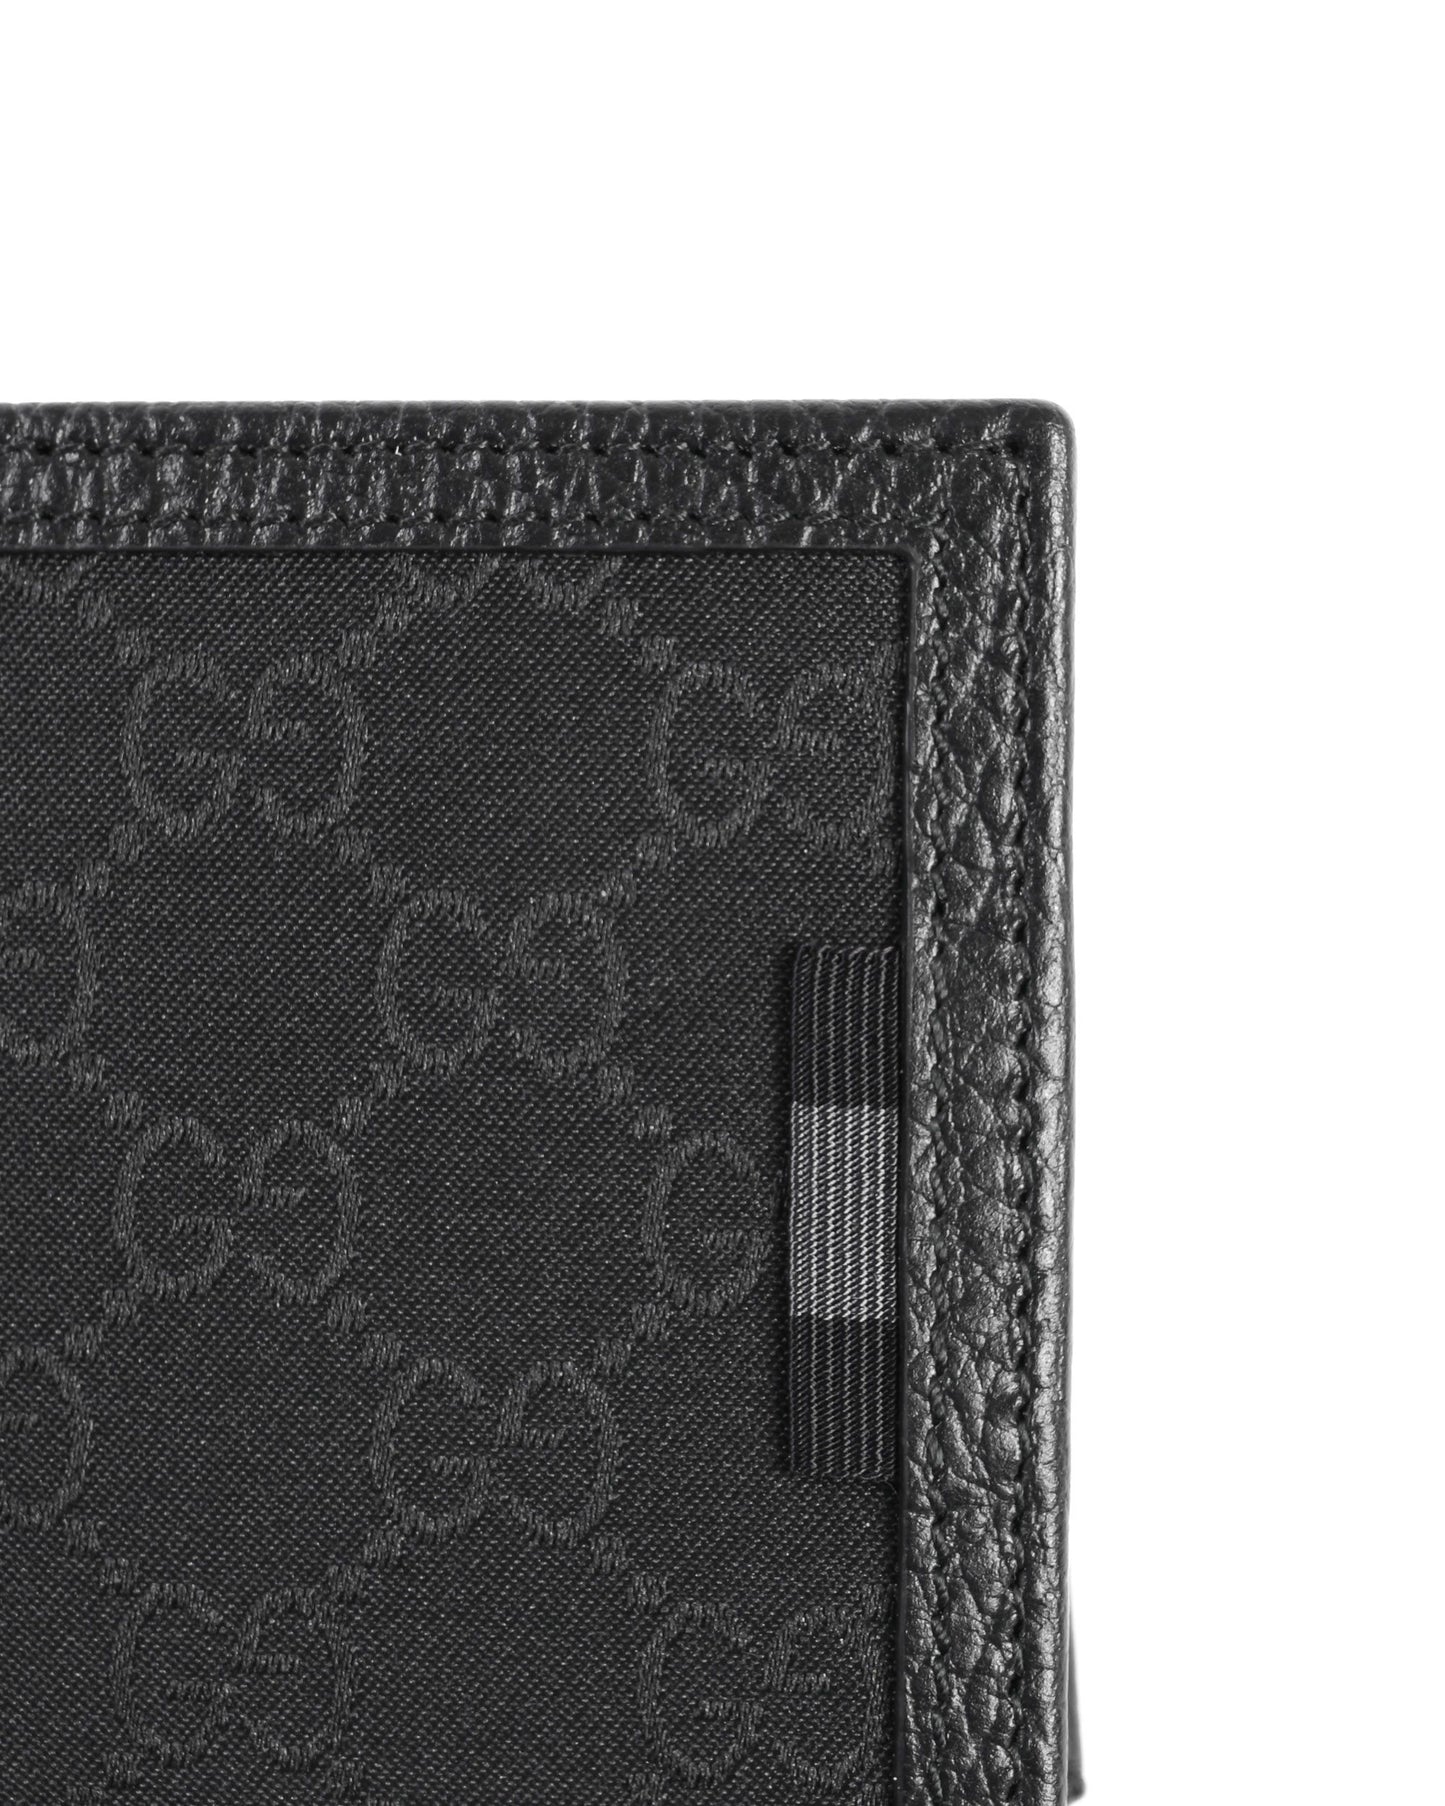 Gucci Monogram fabric and leather wallet 260987 BMJ1N 8615